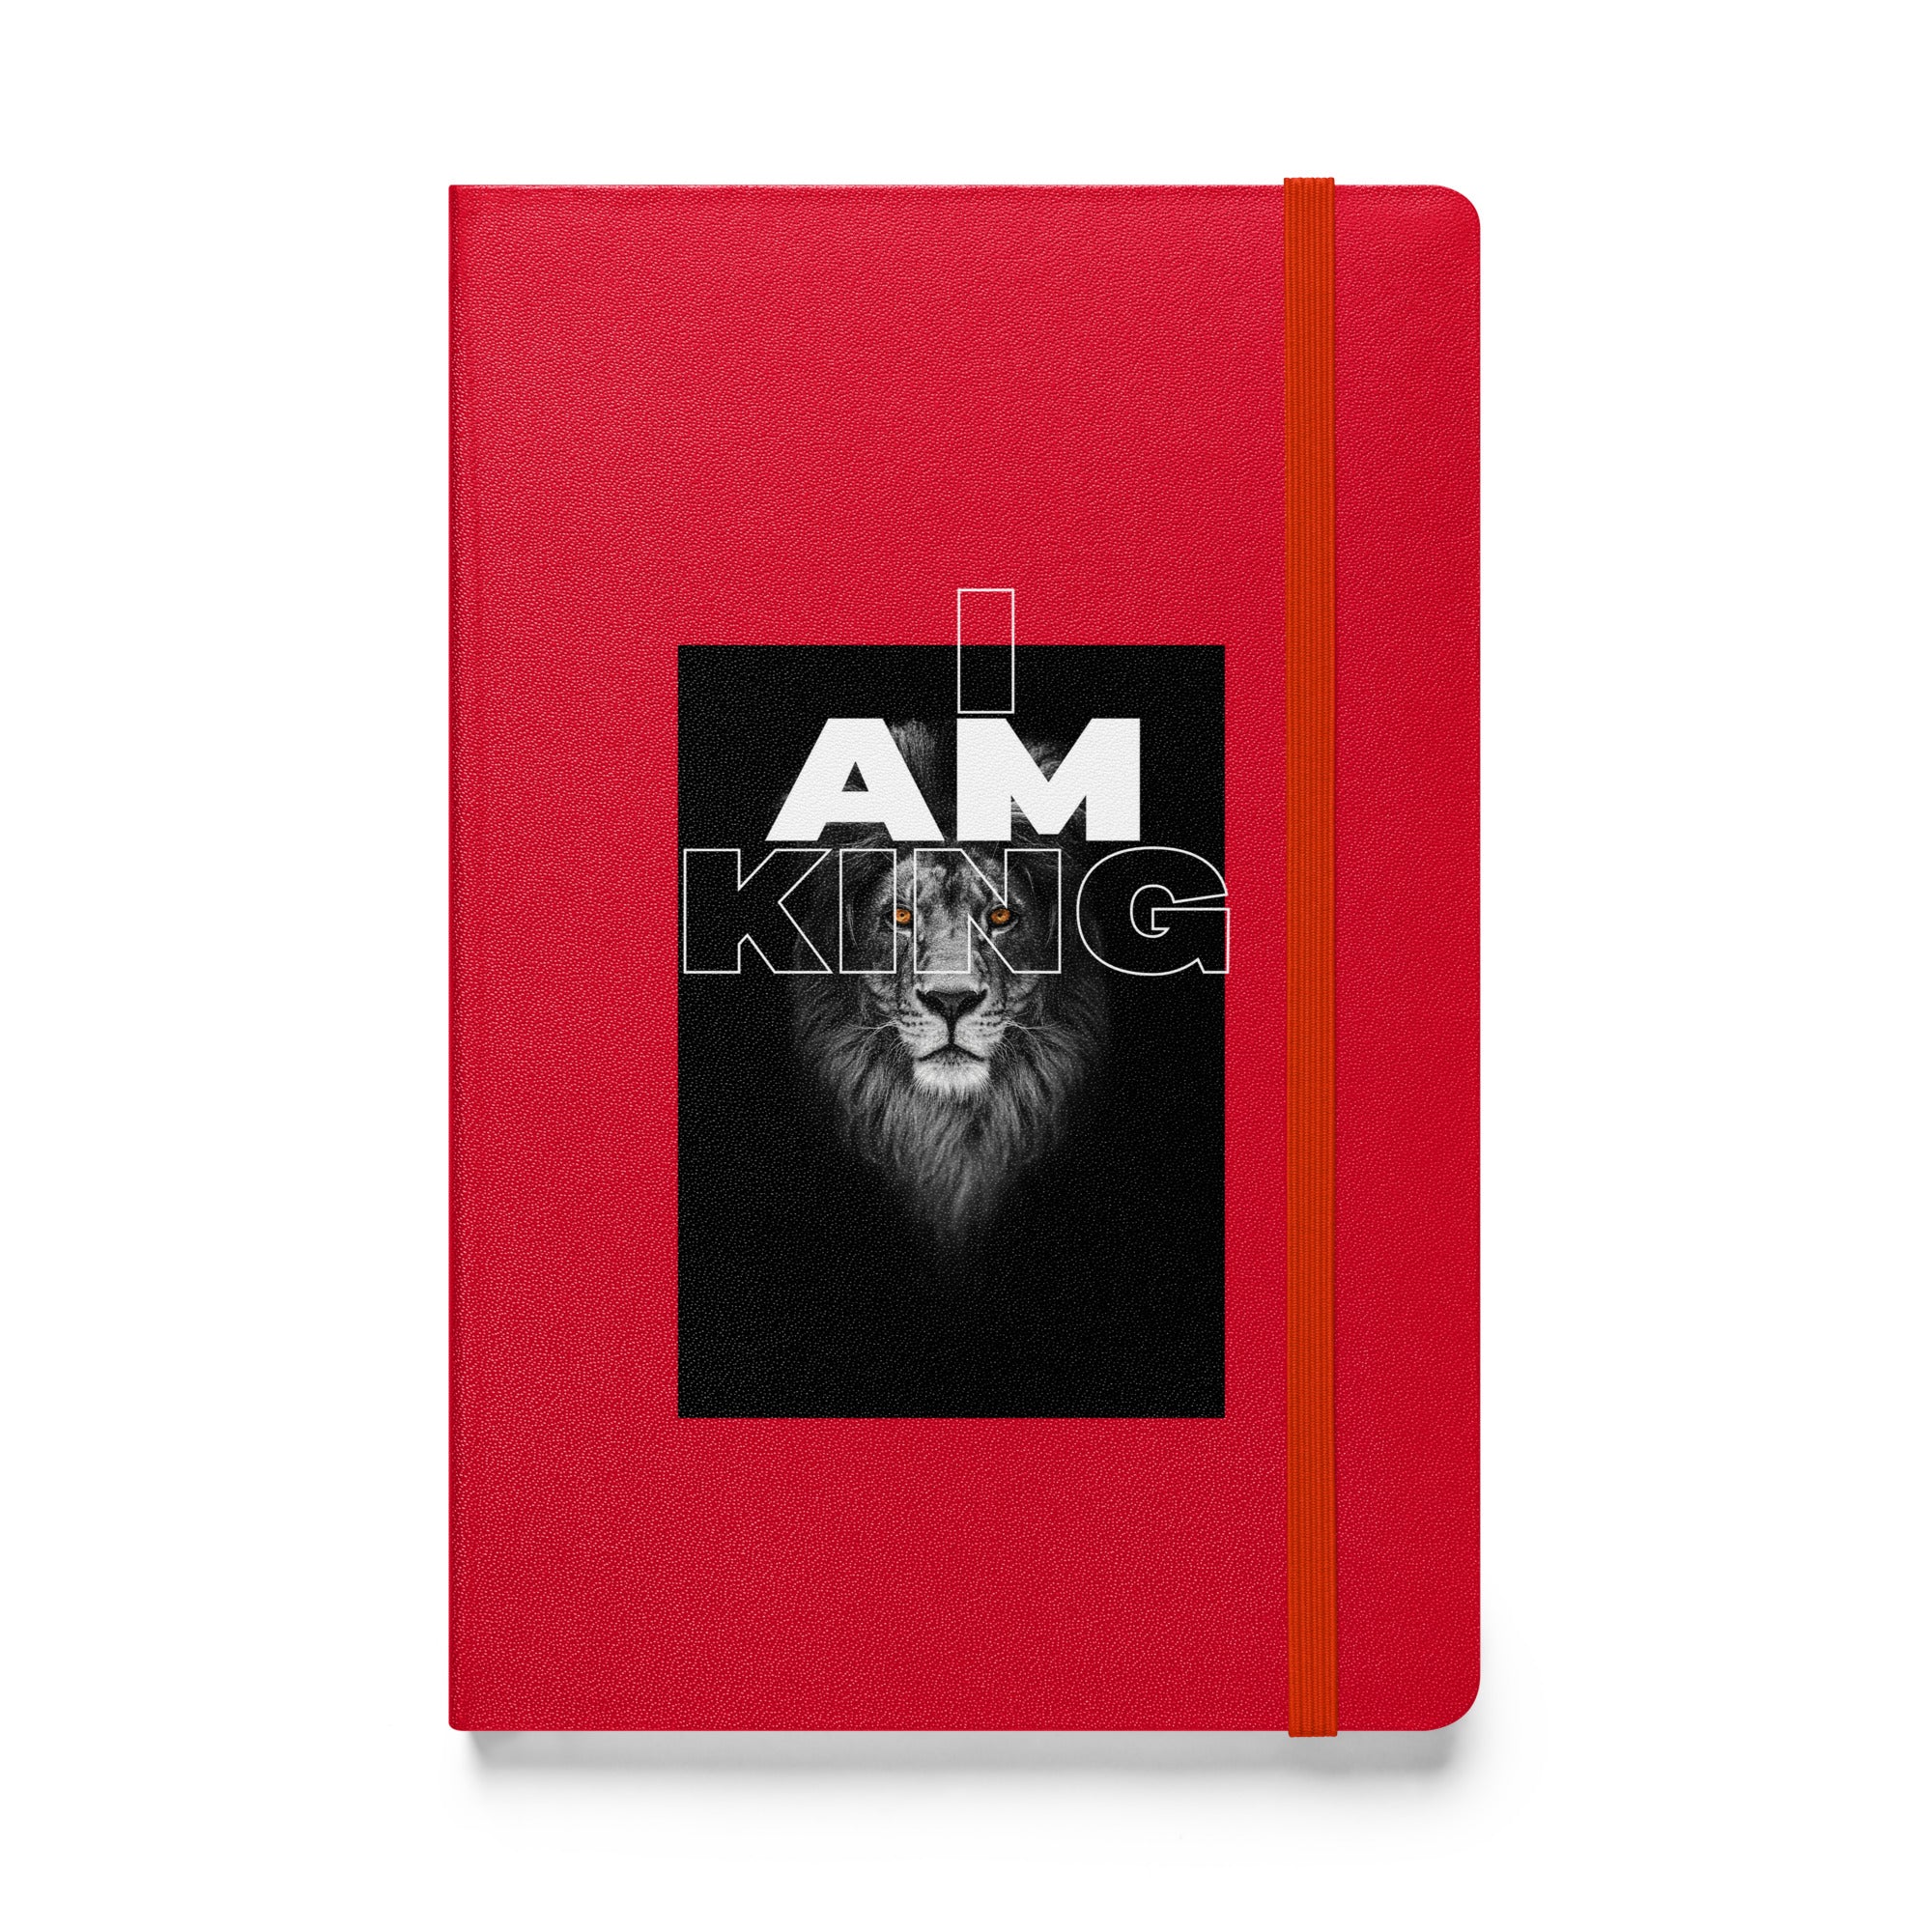 I AM King Hardcover bound notebook